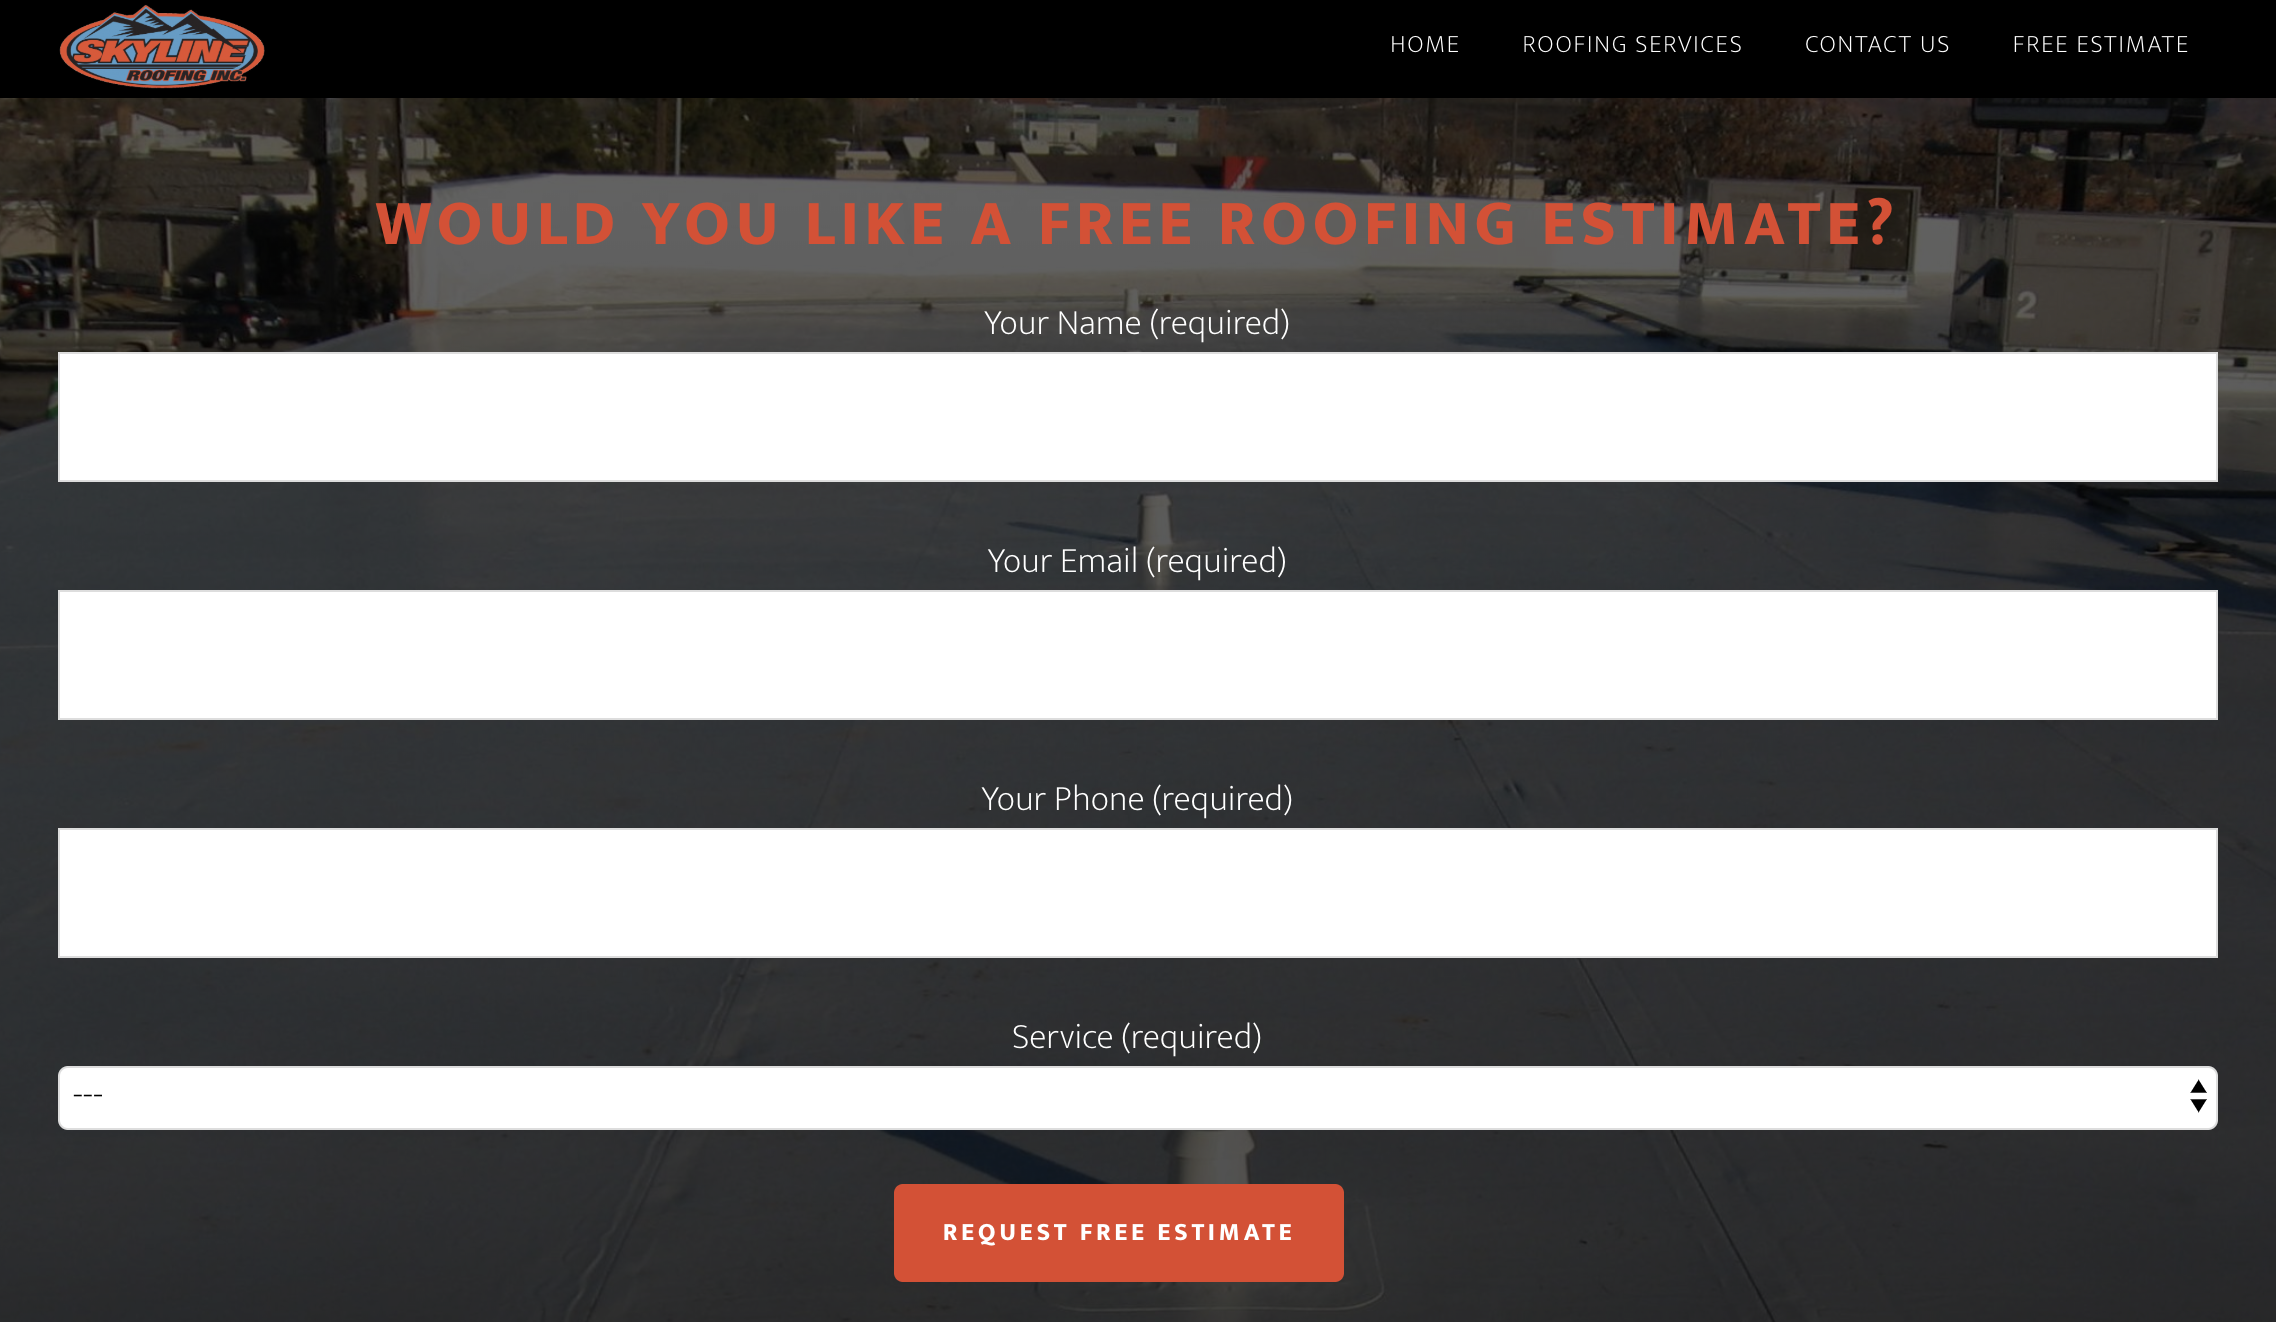 Simple to use contact form for customers to input their information so Skyline Roofing can contact them.